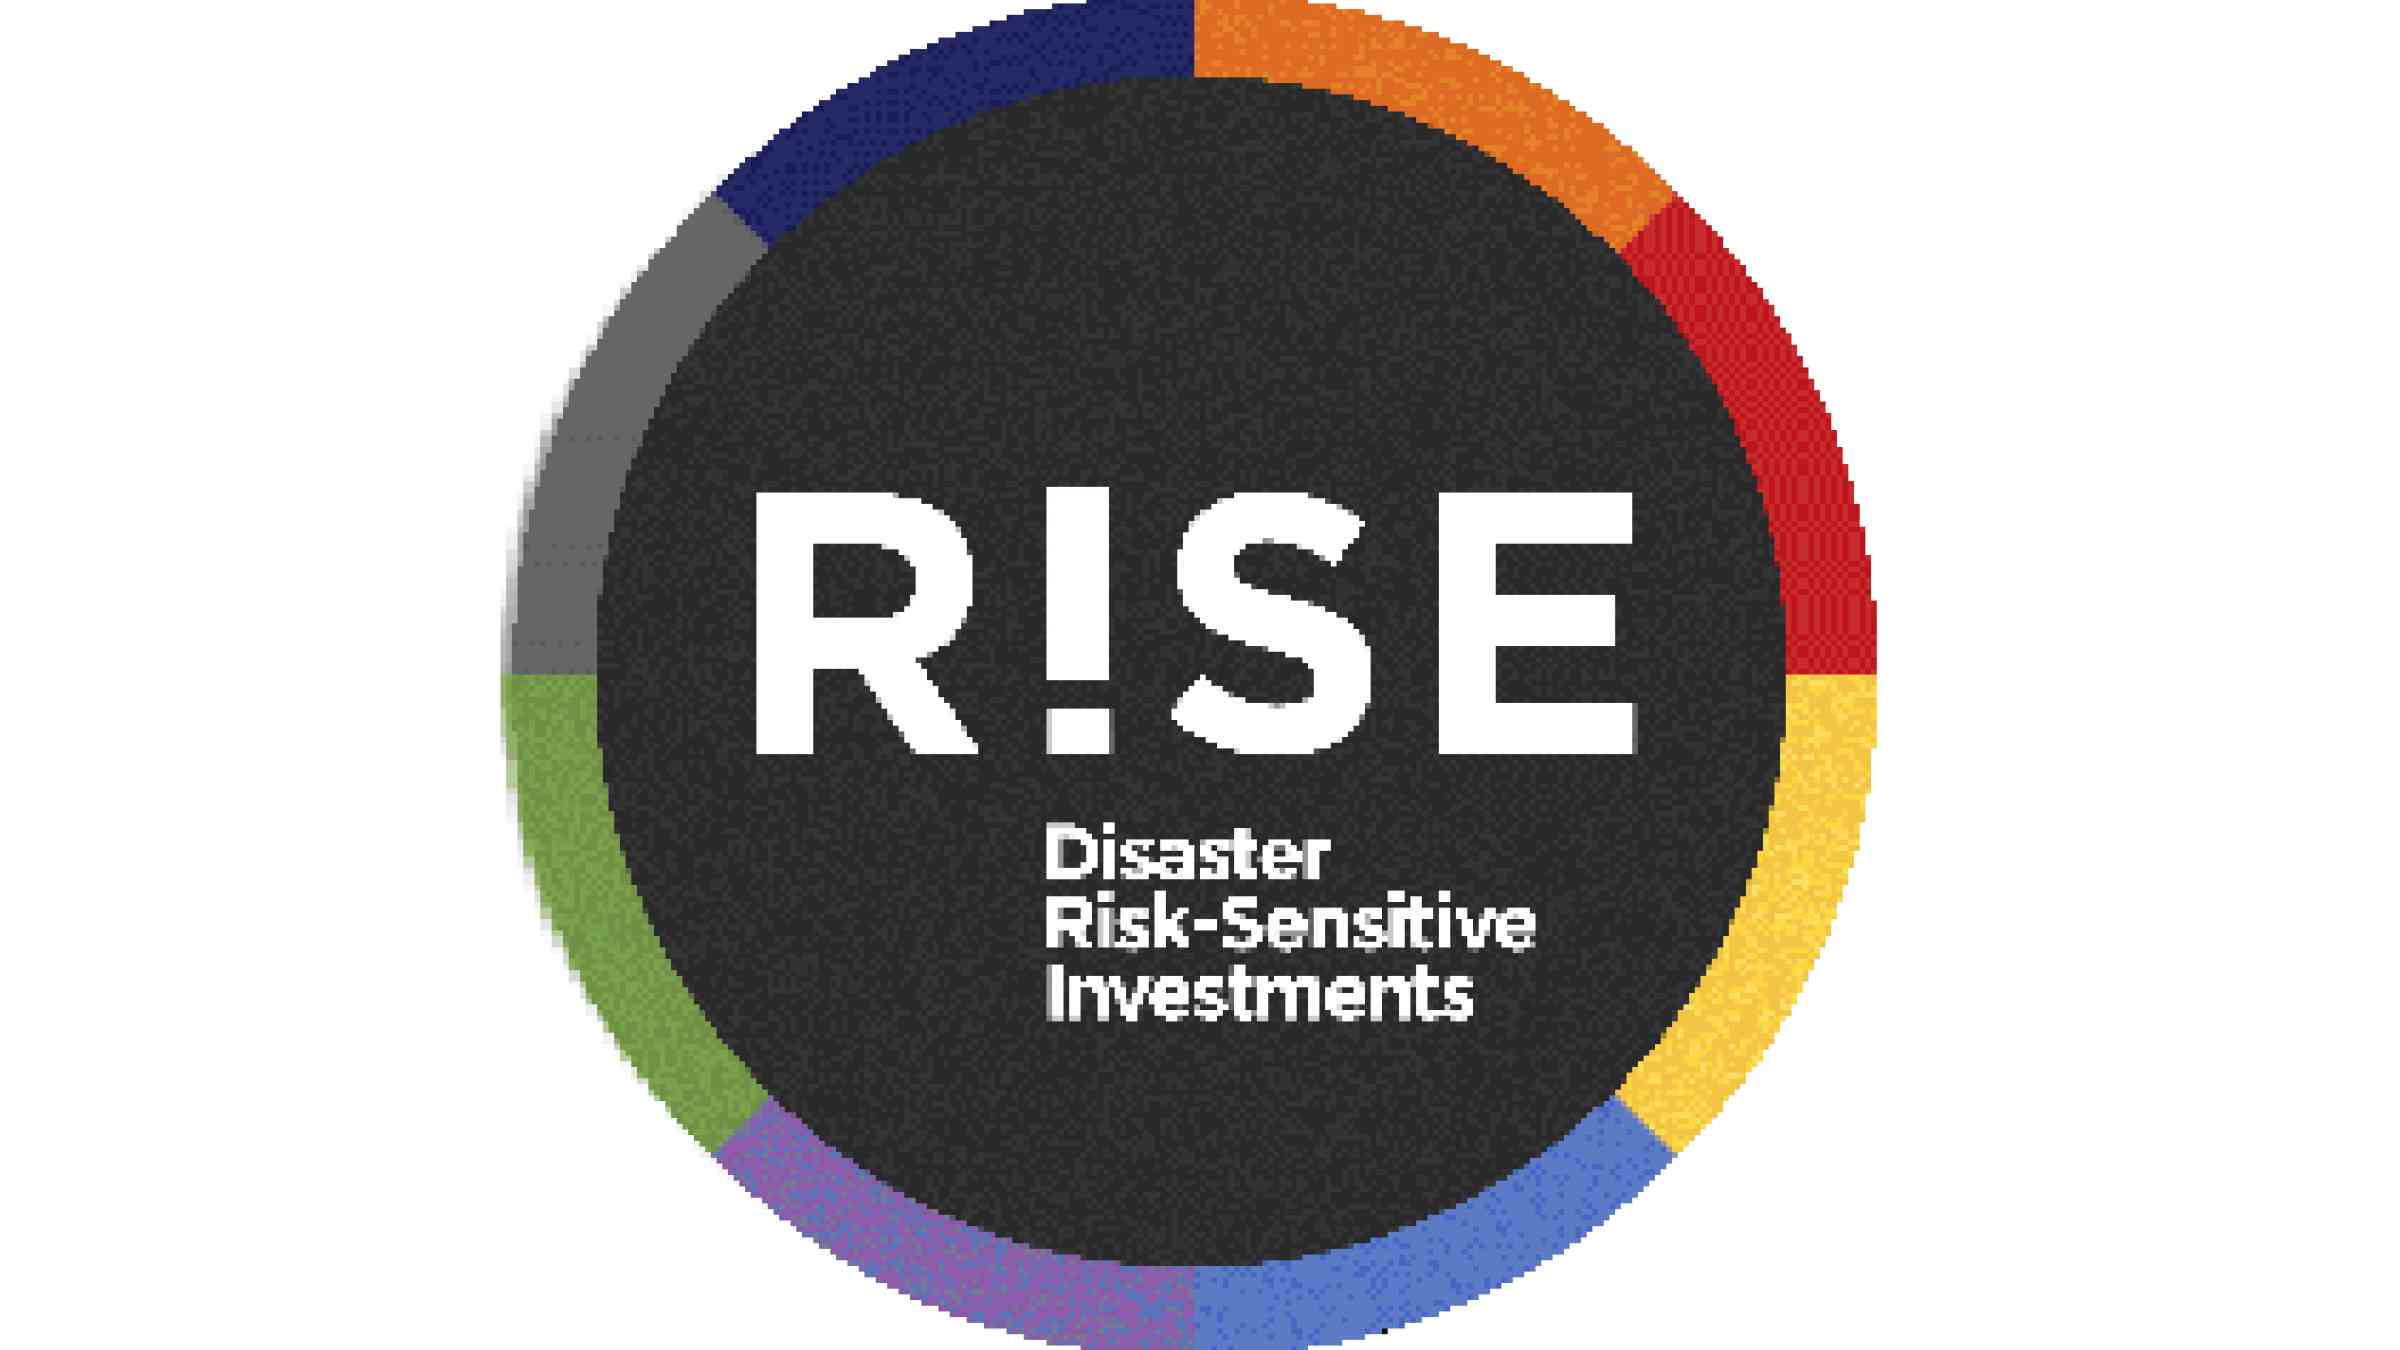 This new initiative brings together leading names in business, investment, insurance, the public sector, business education and civil society to develop global standards and promote risk-sensitive investment.